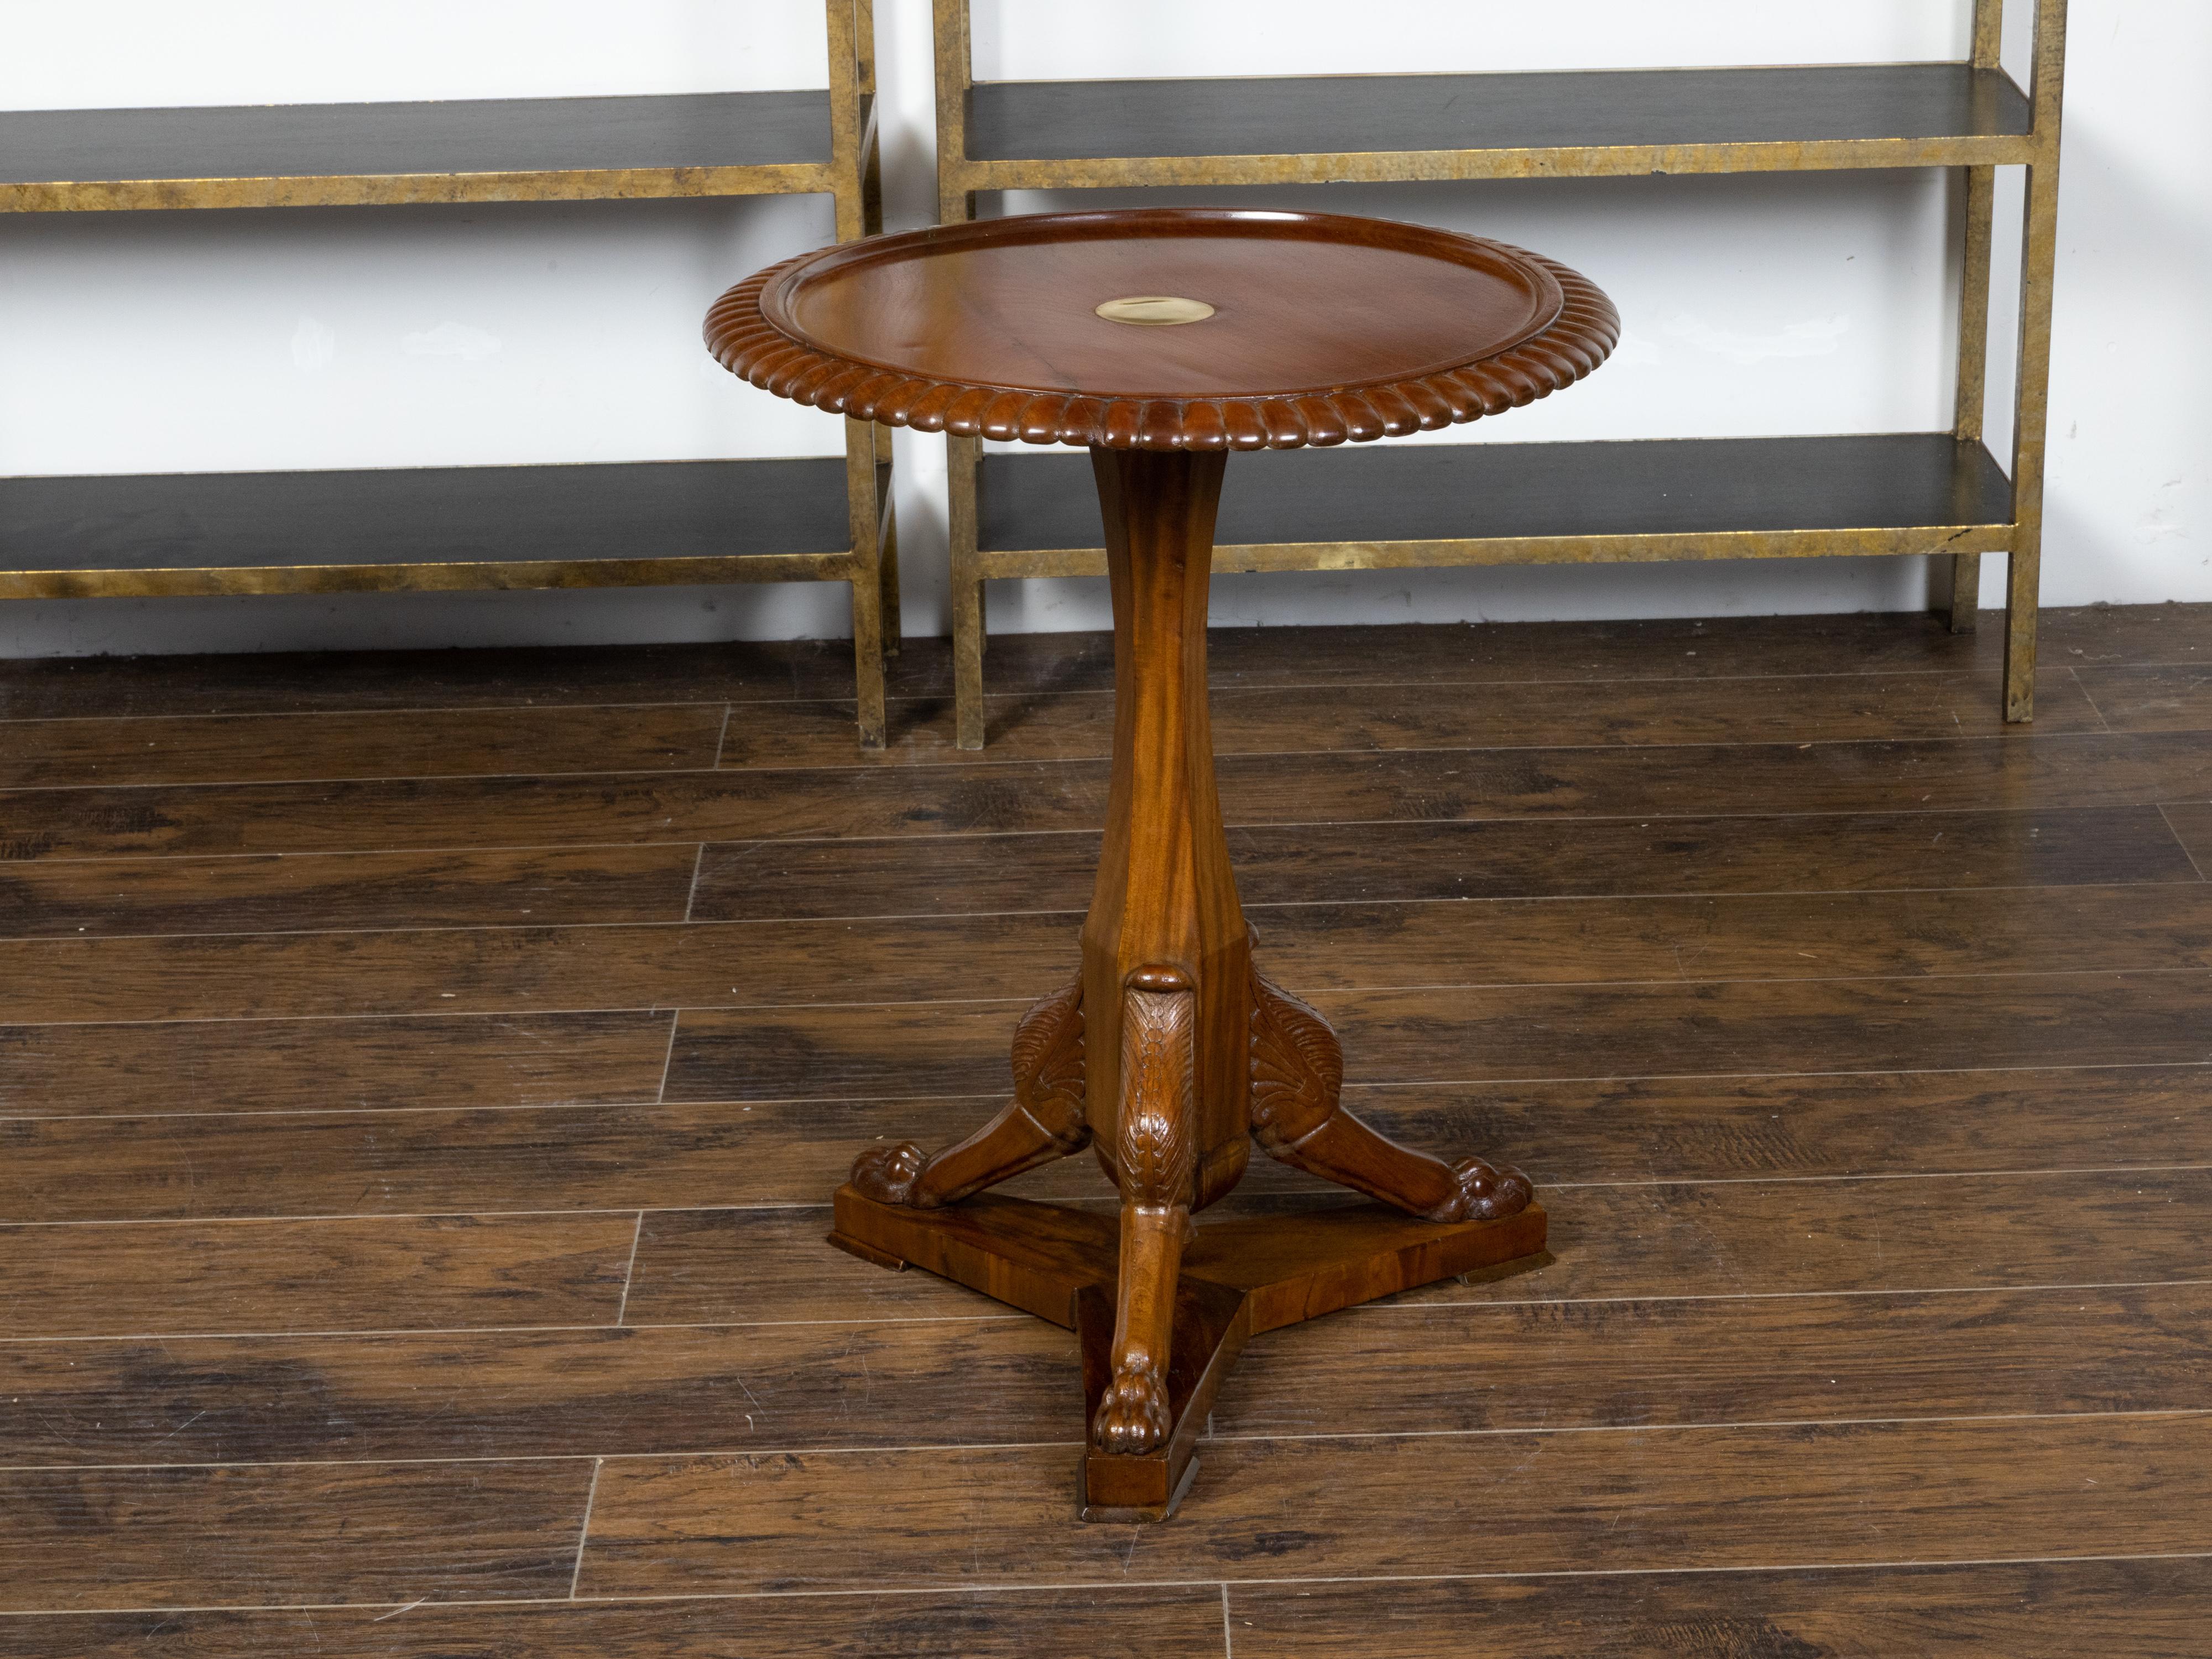 An English mahogany guéridon pedestal side table from the 19th century with brass inlay, gadroon motifs and carved griffin legs. Created in England during the 19th century, this mahogany guéridon side table features a circular top with recessed